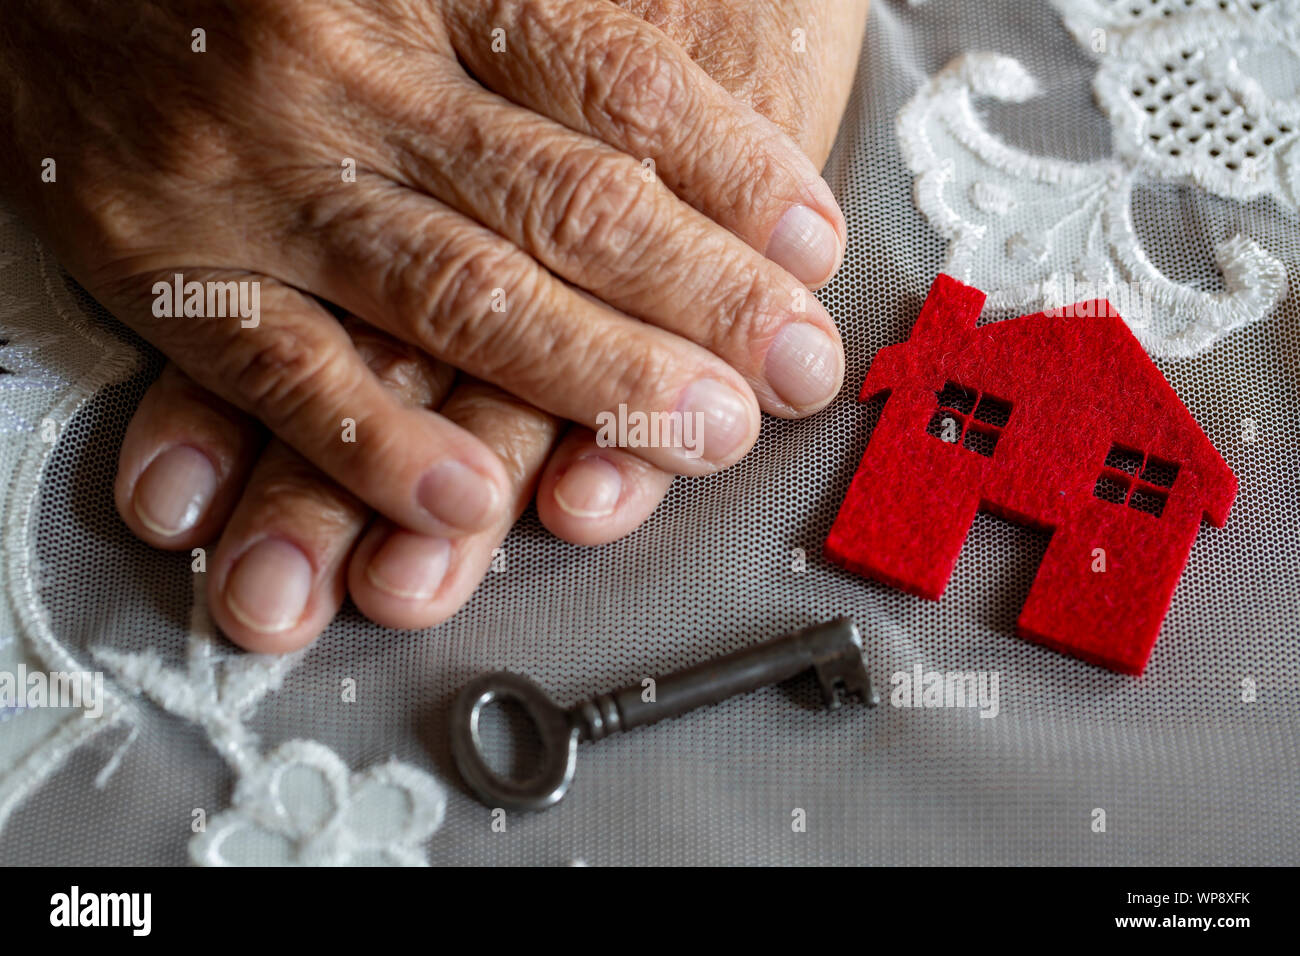 Old Woman Hand with house and key Stock Photo